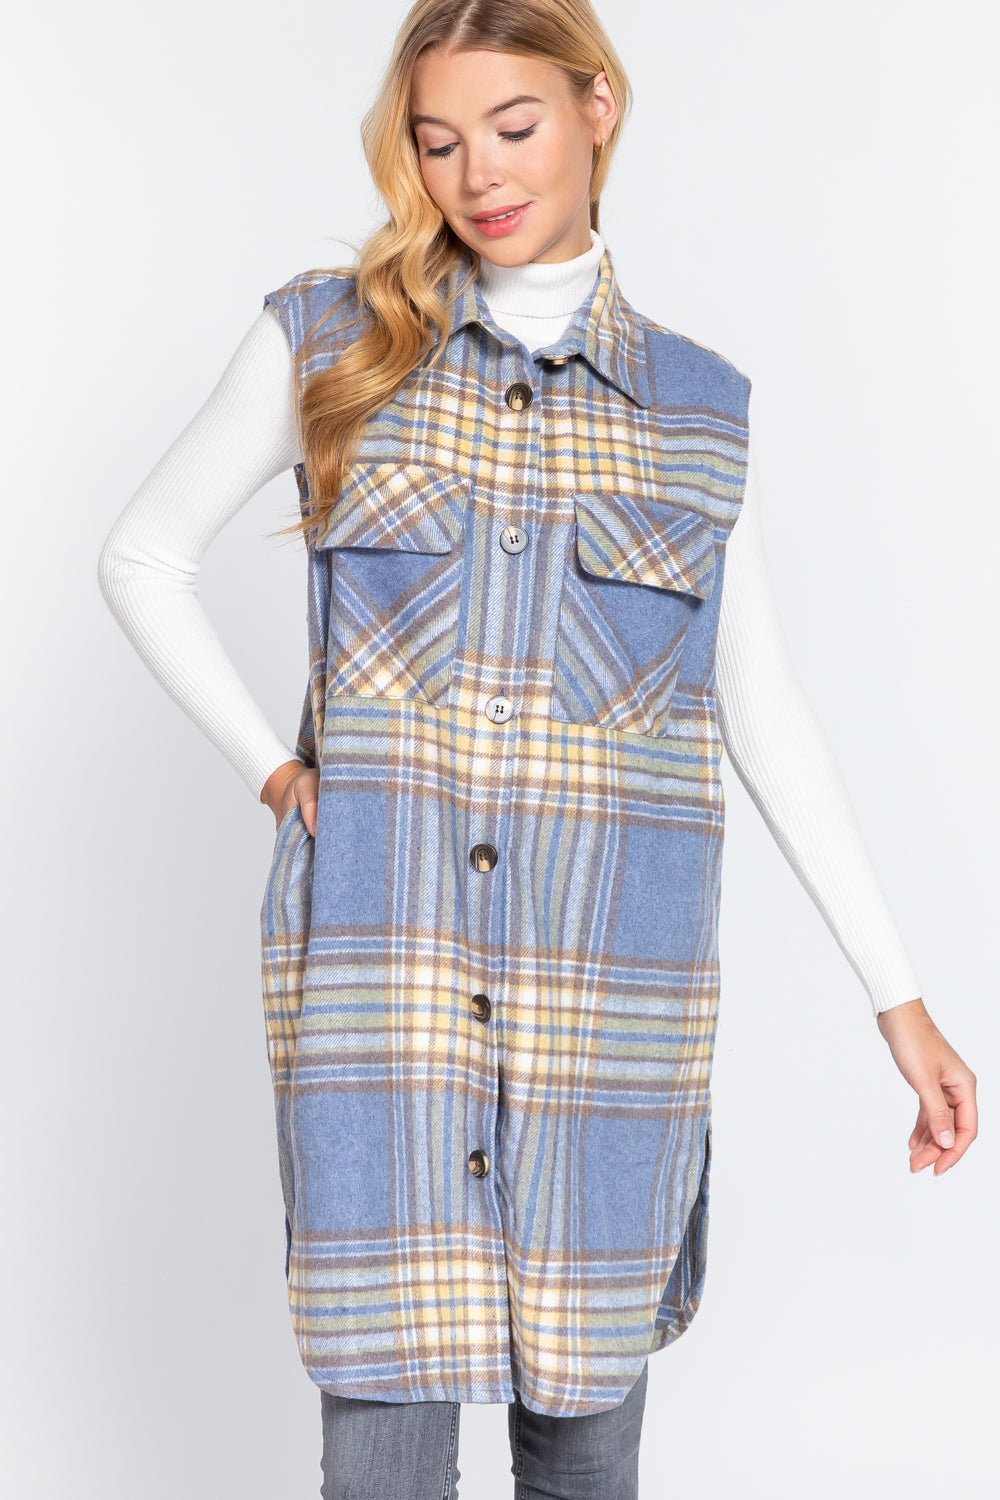 Blue/Mustard - Notched Collar Brushed Plaid Vest - 2 styles - womens vest at TFC&H Co.